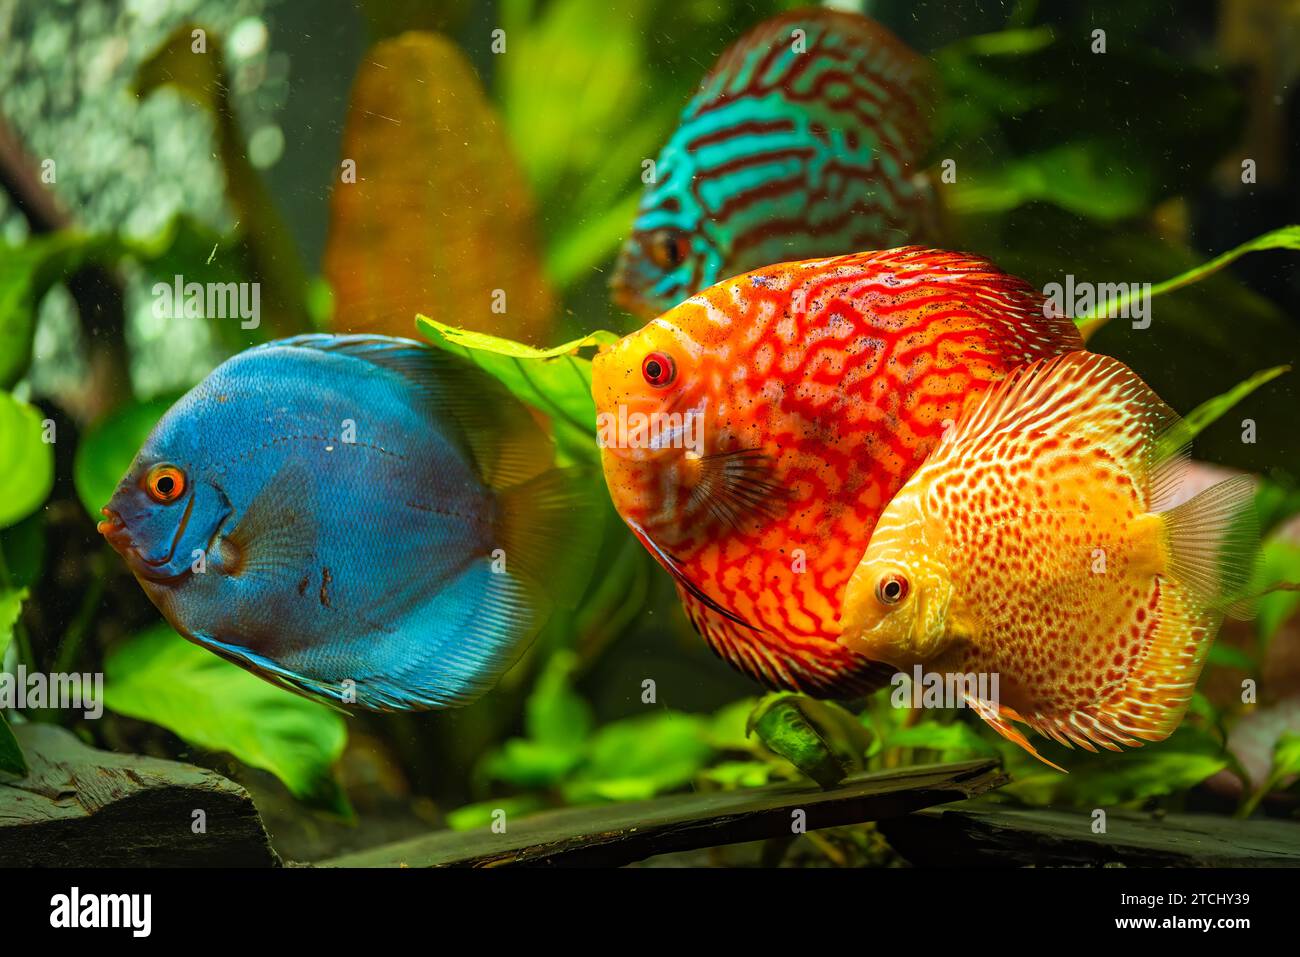 Colorful fish from the spieces discus (Symphysodon) in aquarium. Freshwater aquaria concept Stock Photo